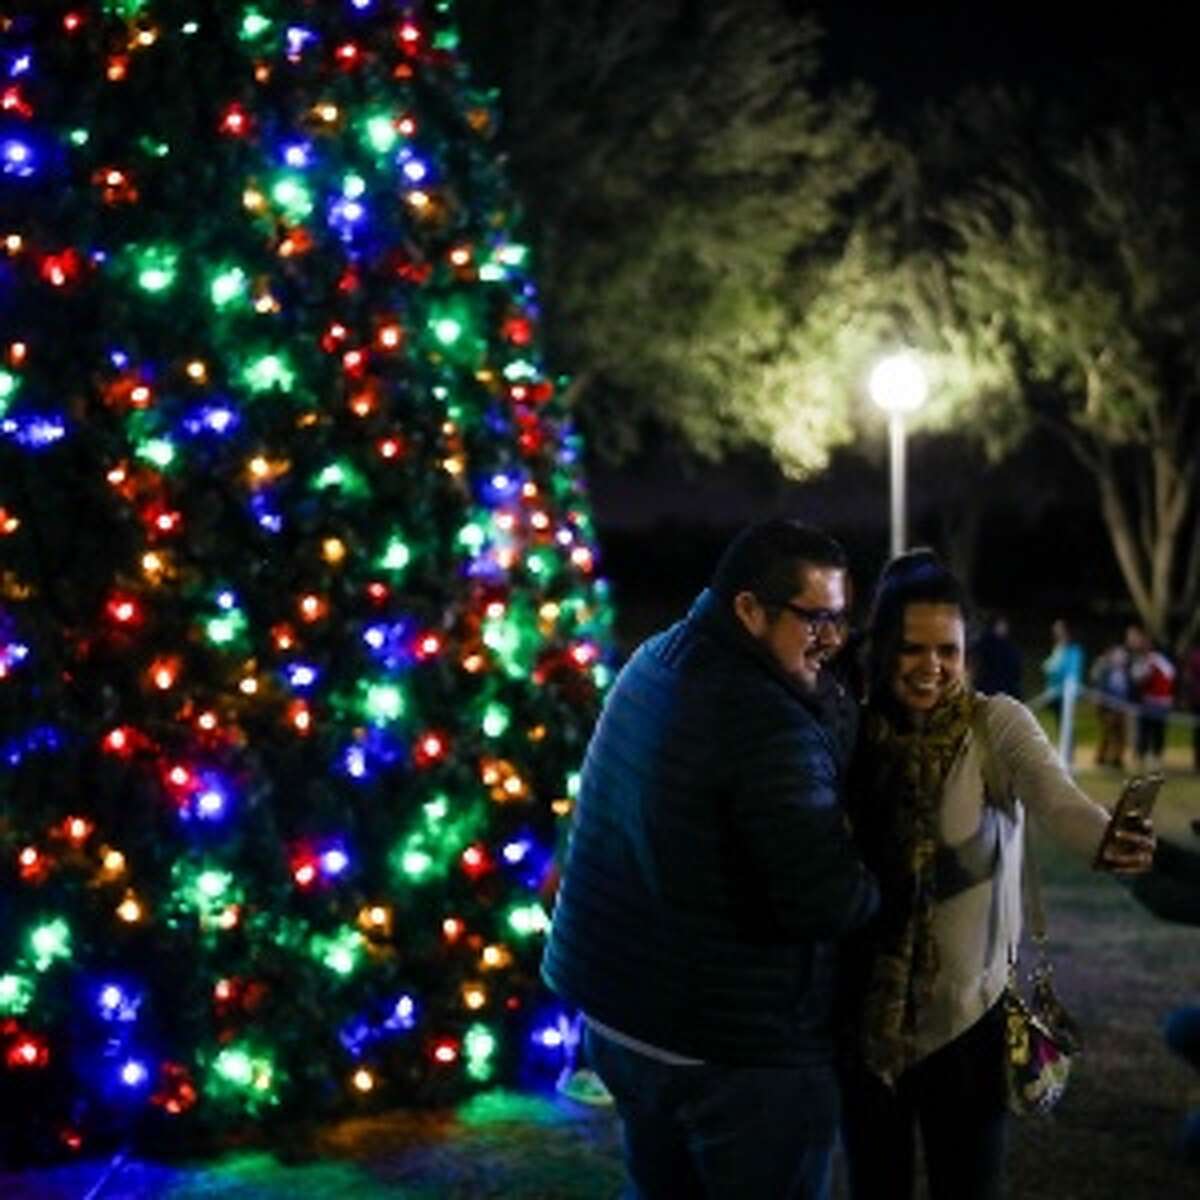 TAMIU will hold its annual holiday celebration and tree lighting ceremony on Tuesday, Nov. 22.